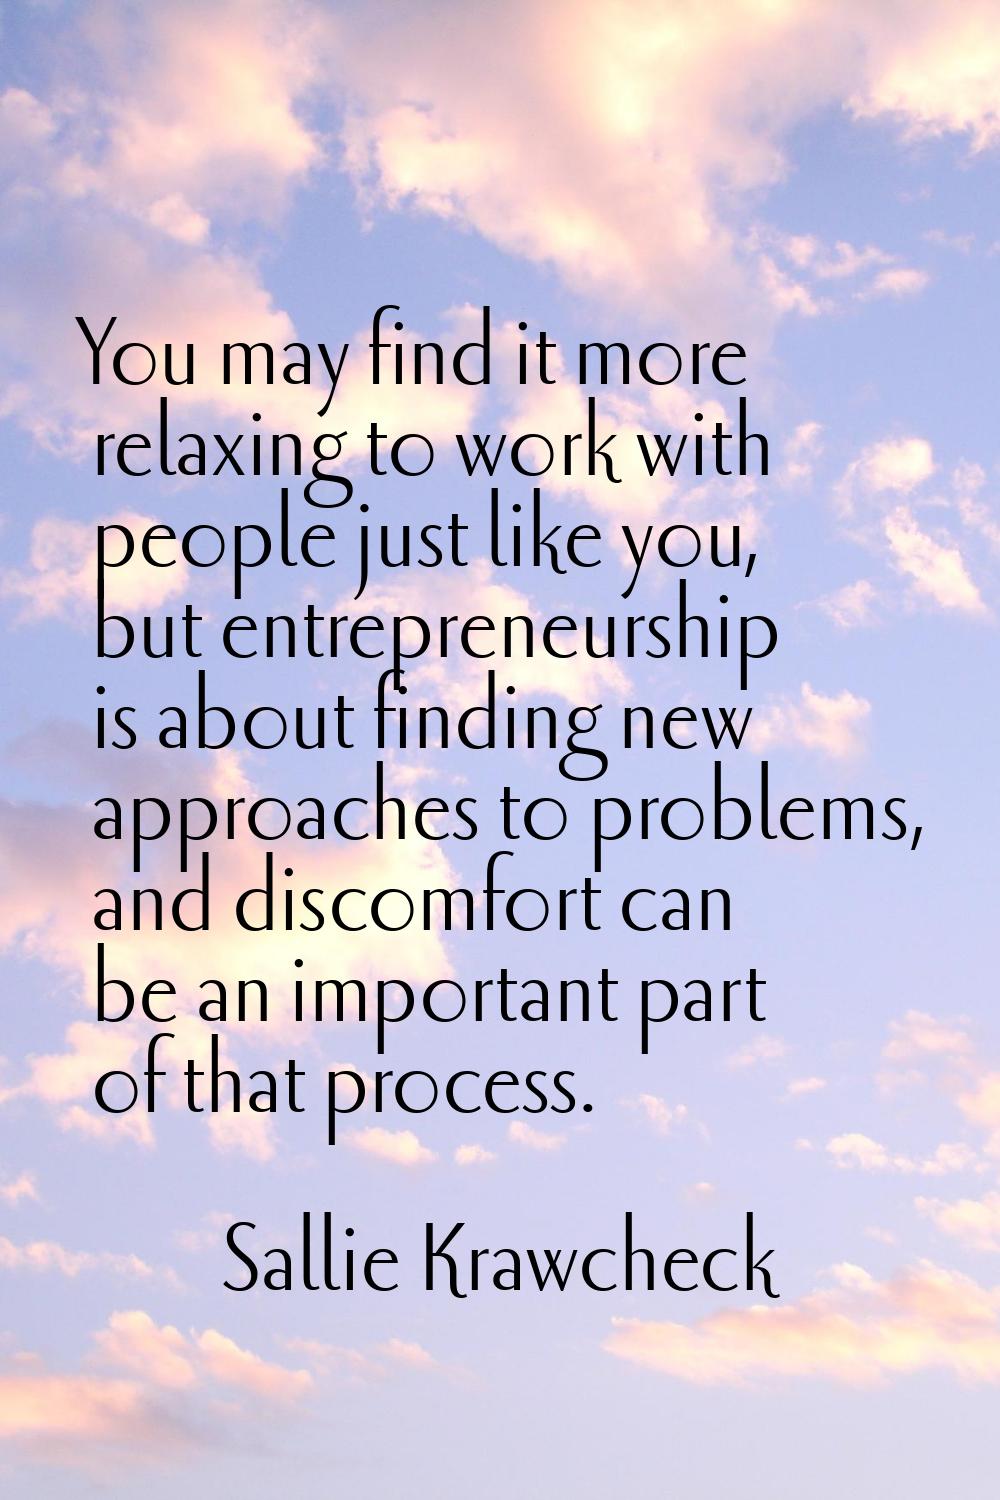 You may find it more relaxing to work with people just like you, but entrepreneurship is about find